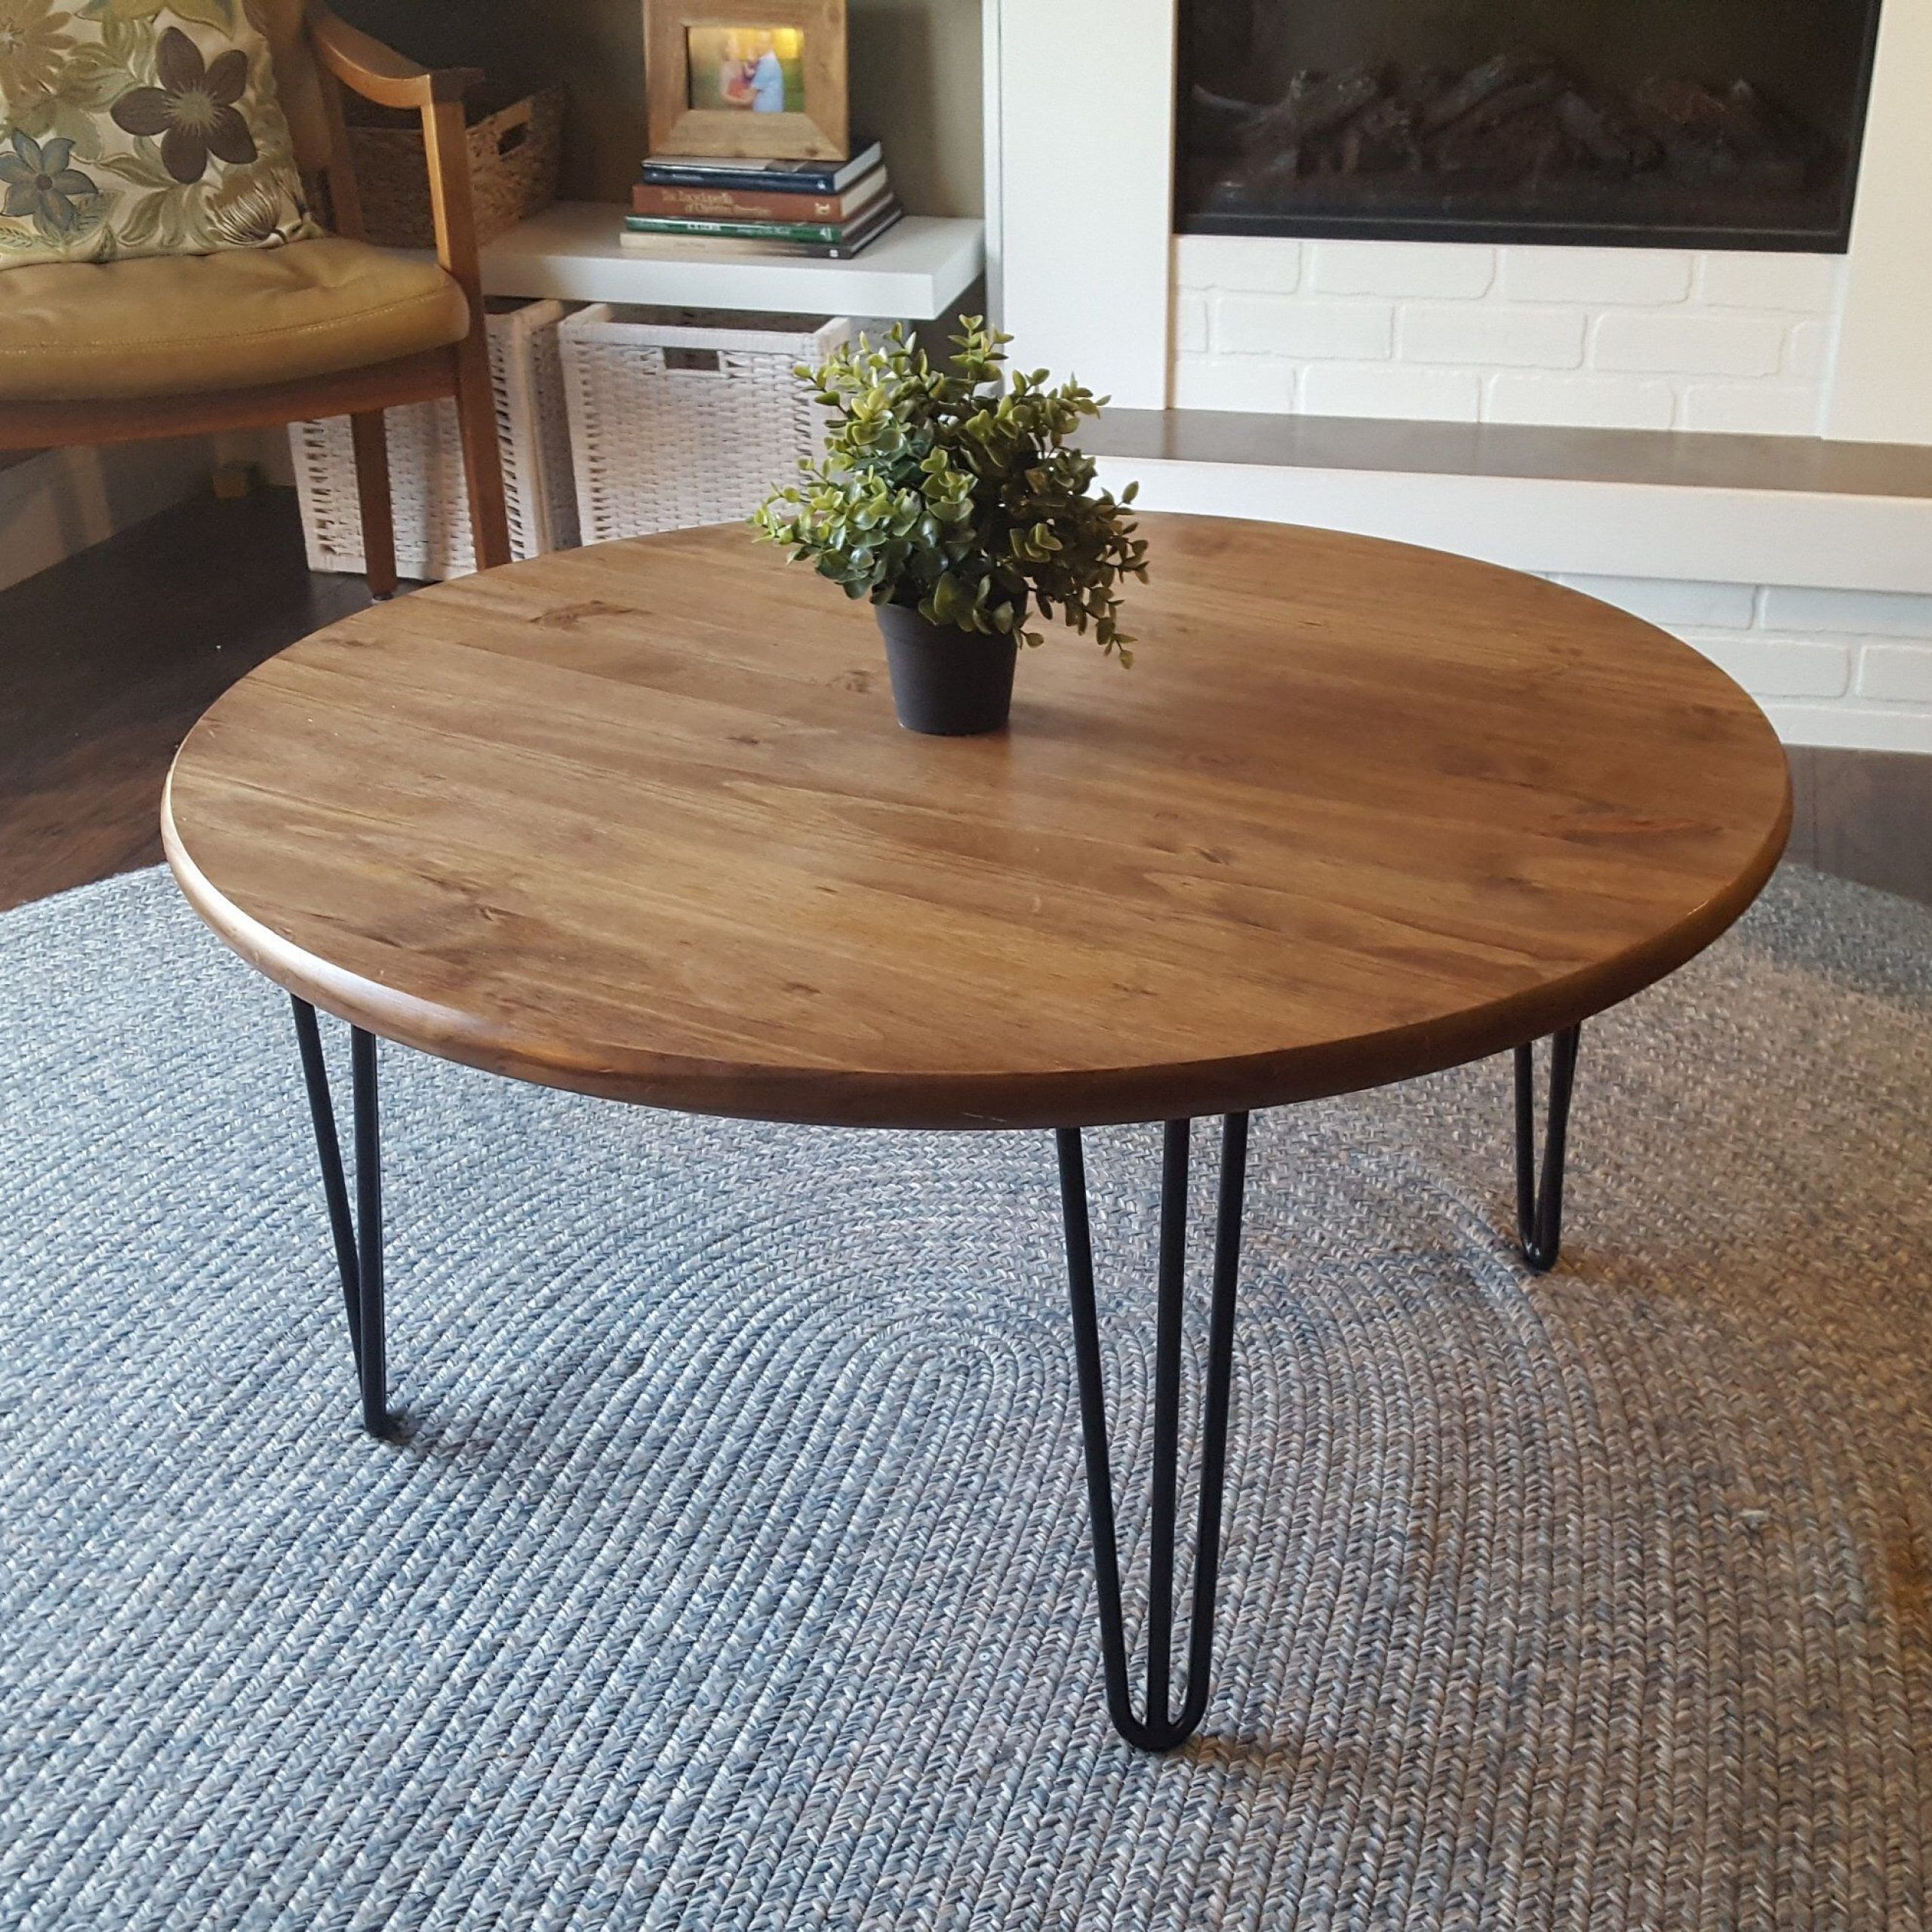 24" Hairpin Coffee Table  Round, Sofa, Living Room, Mid Century Modern Throughout Leaf Round Console Tables (View 17 of 20)